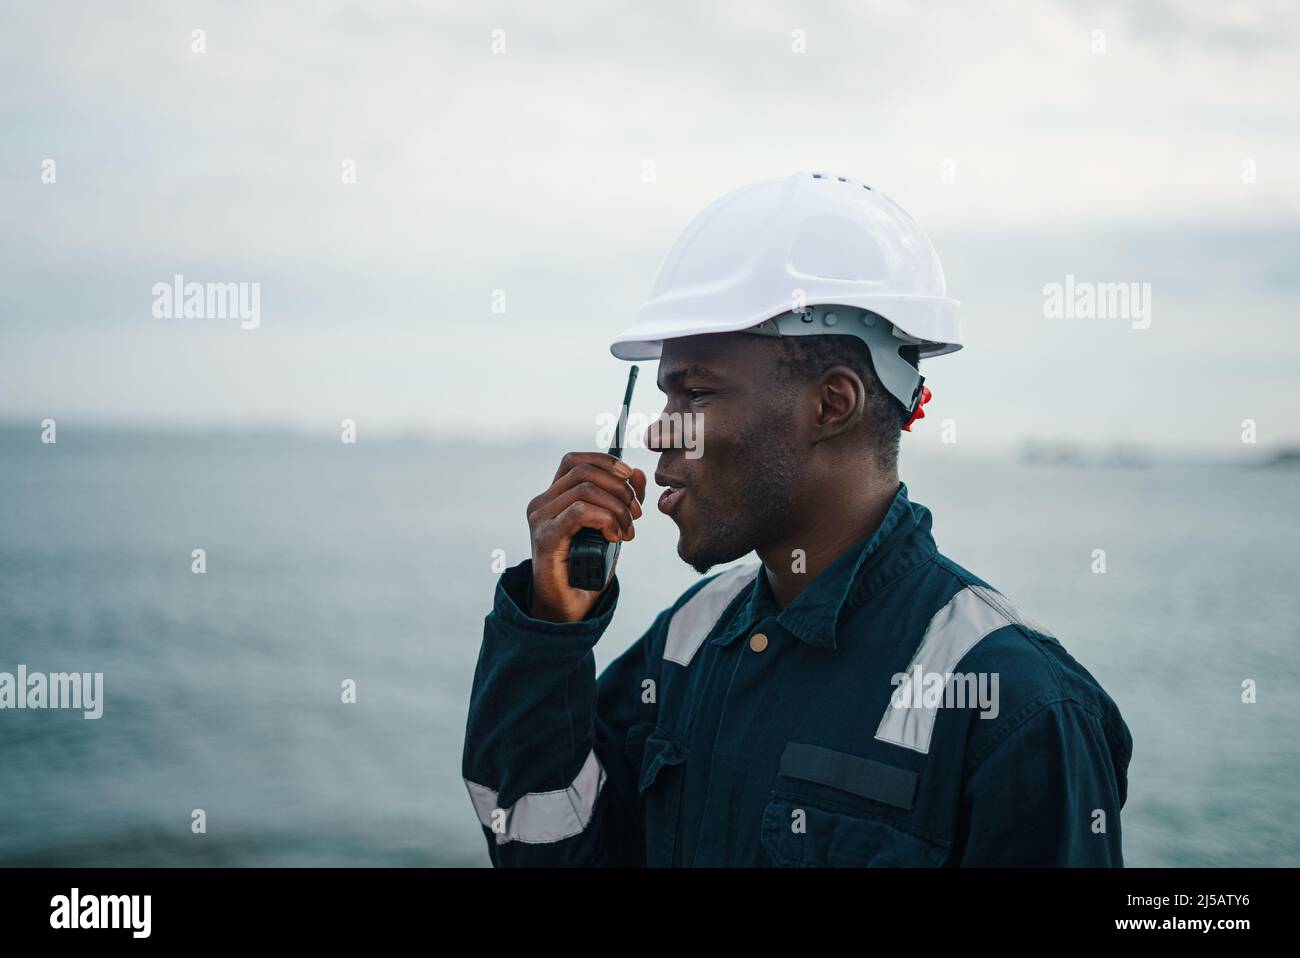 Marine Deck Officer or Chief mate on deck of vessel or ship with VHF walkie-talkie radio  Stock Photo